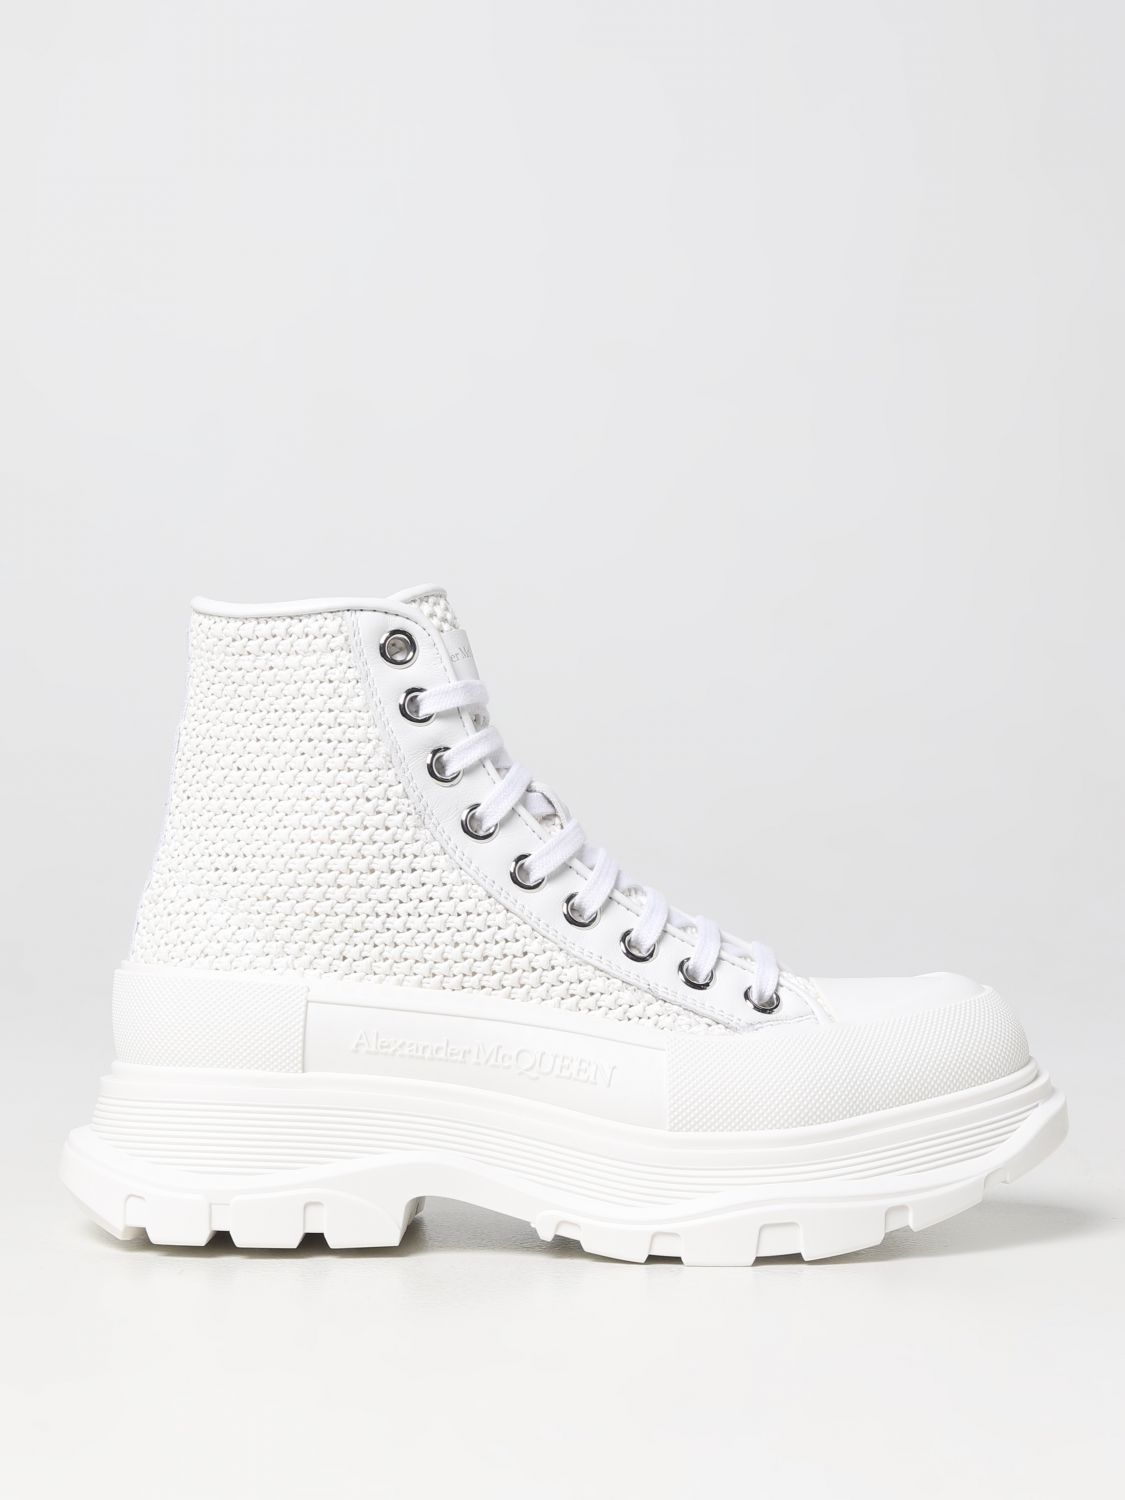 Women's Luxury Sneakers - Alexander McQueen Tread Slick high Pink and White  Canvas Sneakers